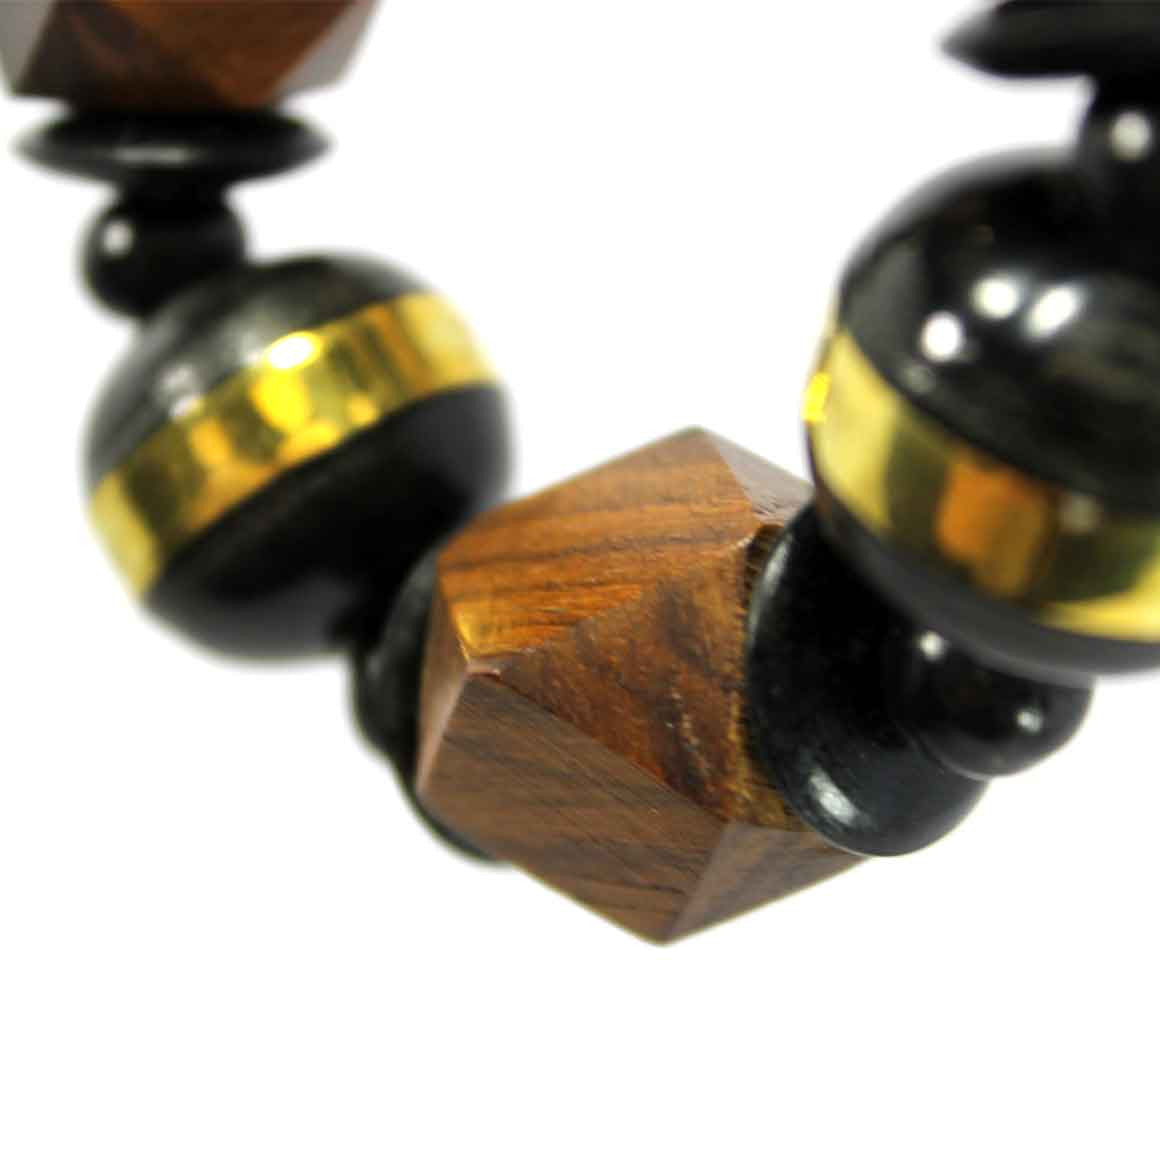 Fair Trade Ethical Resin, Metal and Wood Necklace Shapes